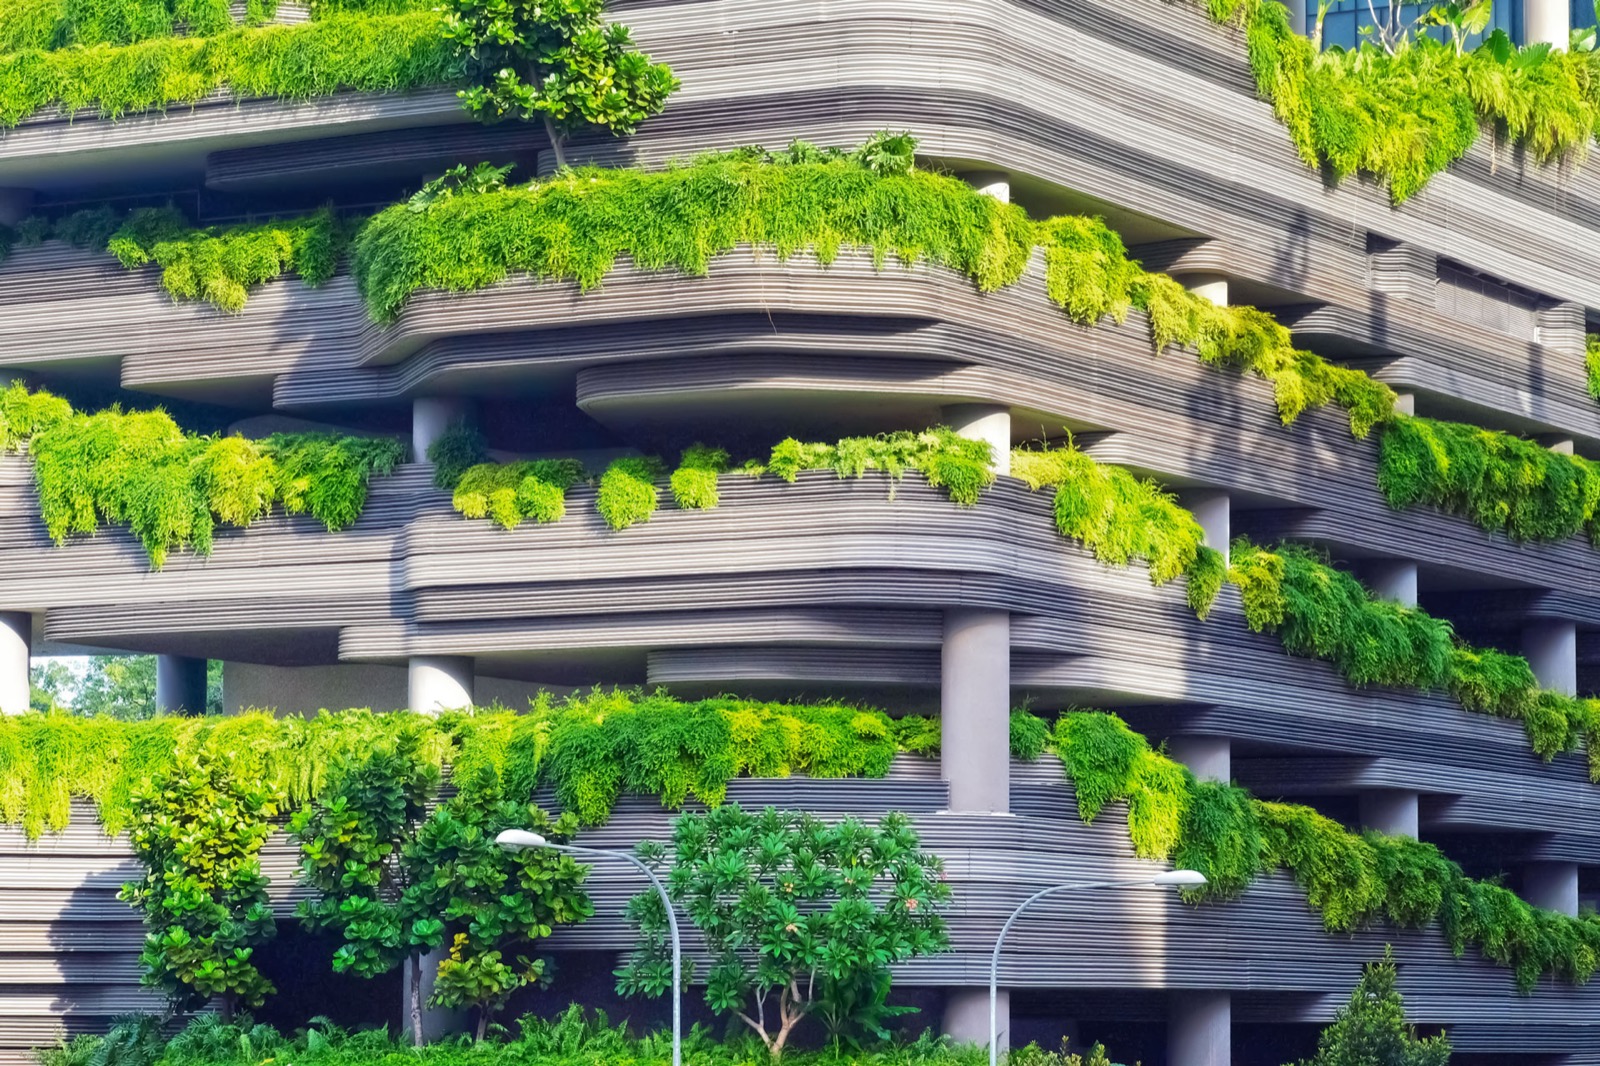 A futuristic building made of many visible layers and columns, heavily covered with plants.